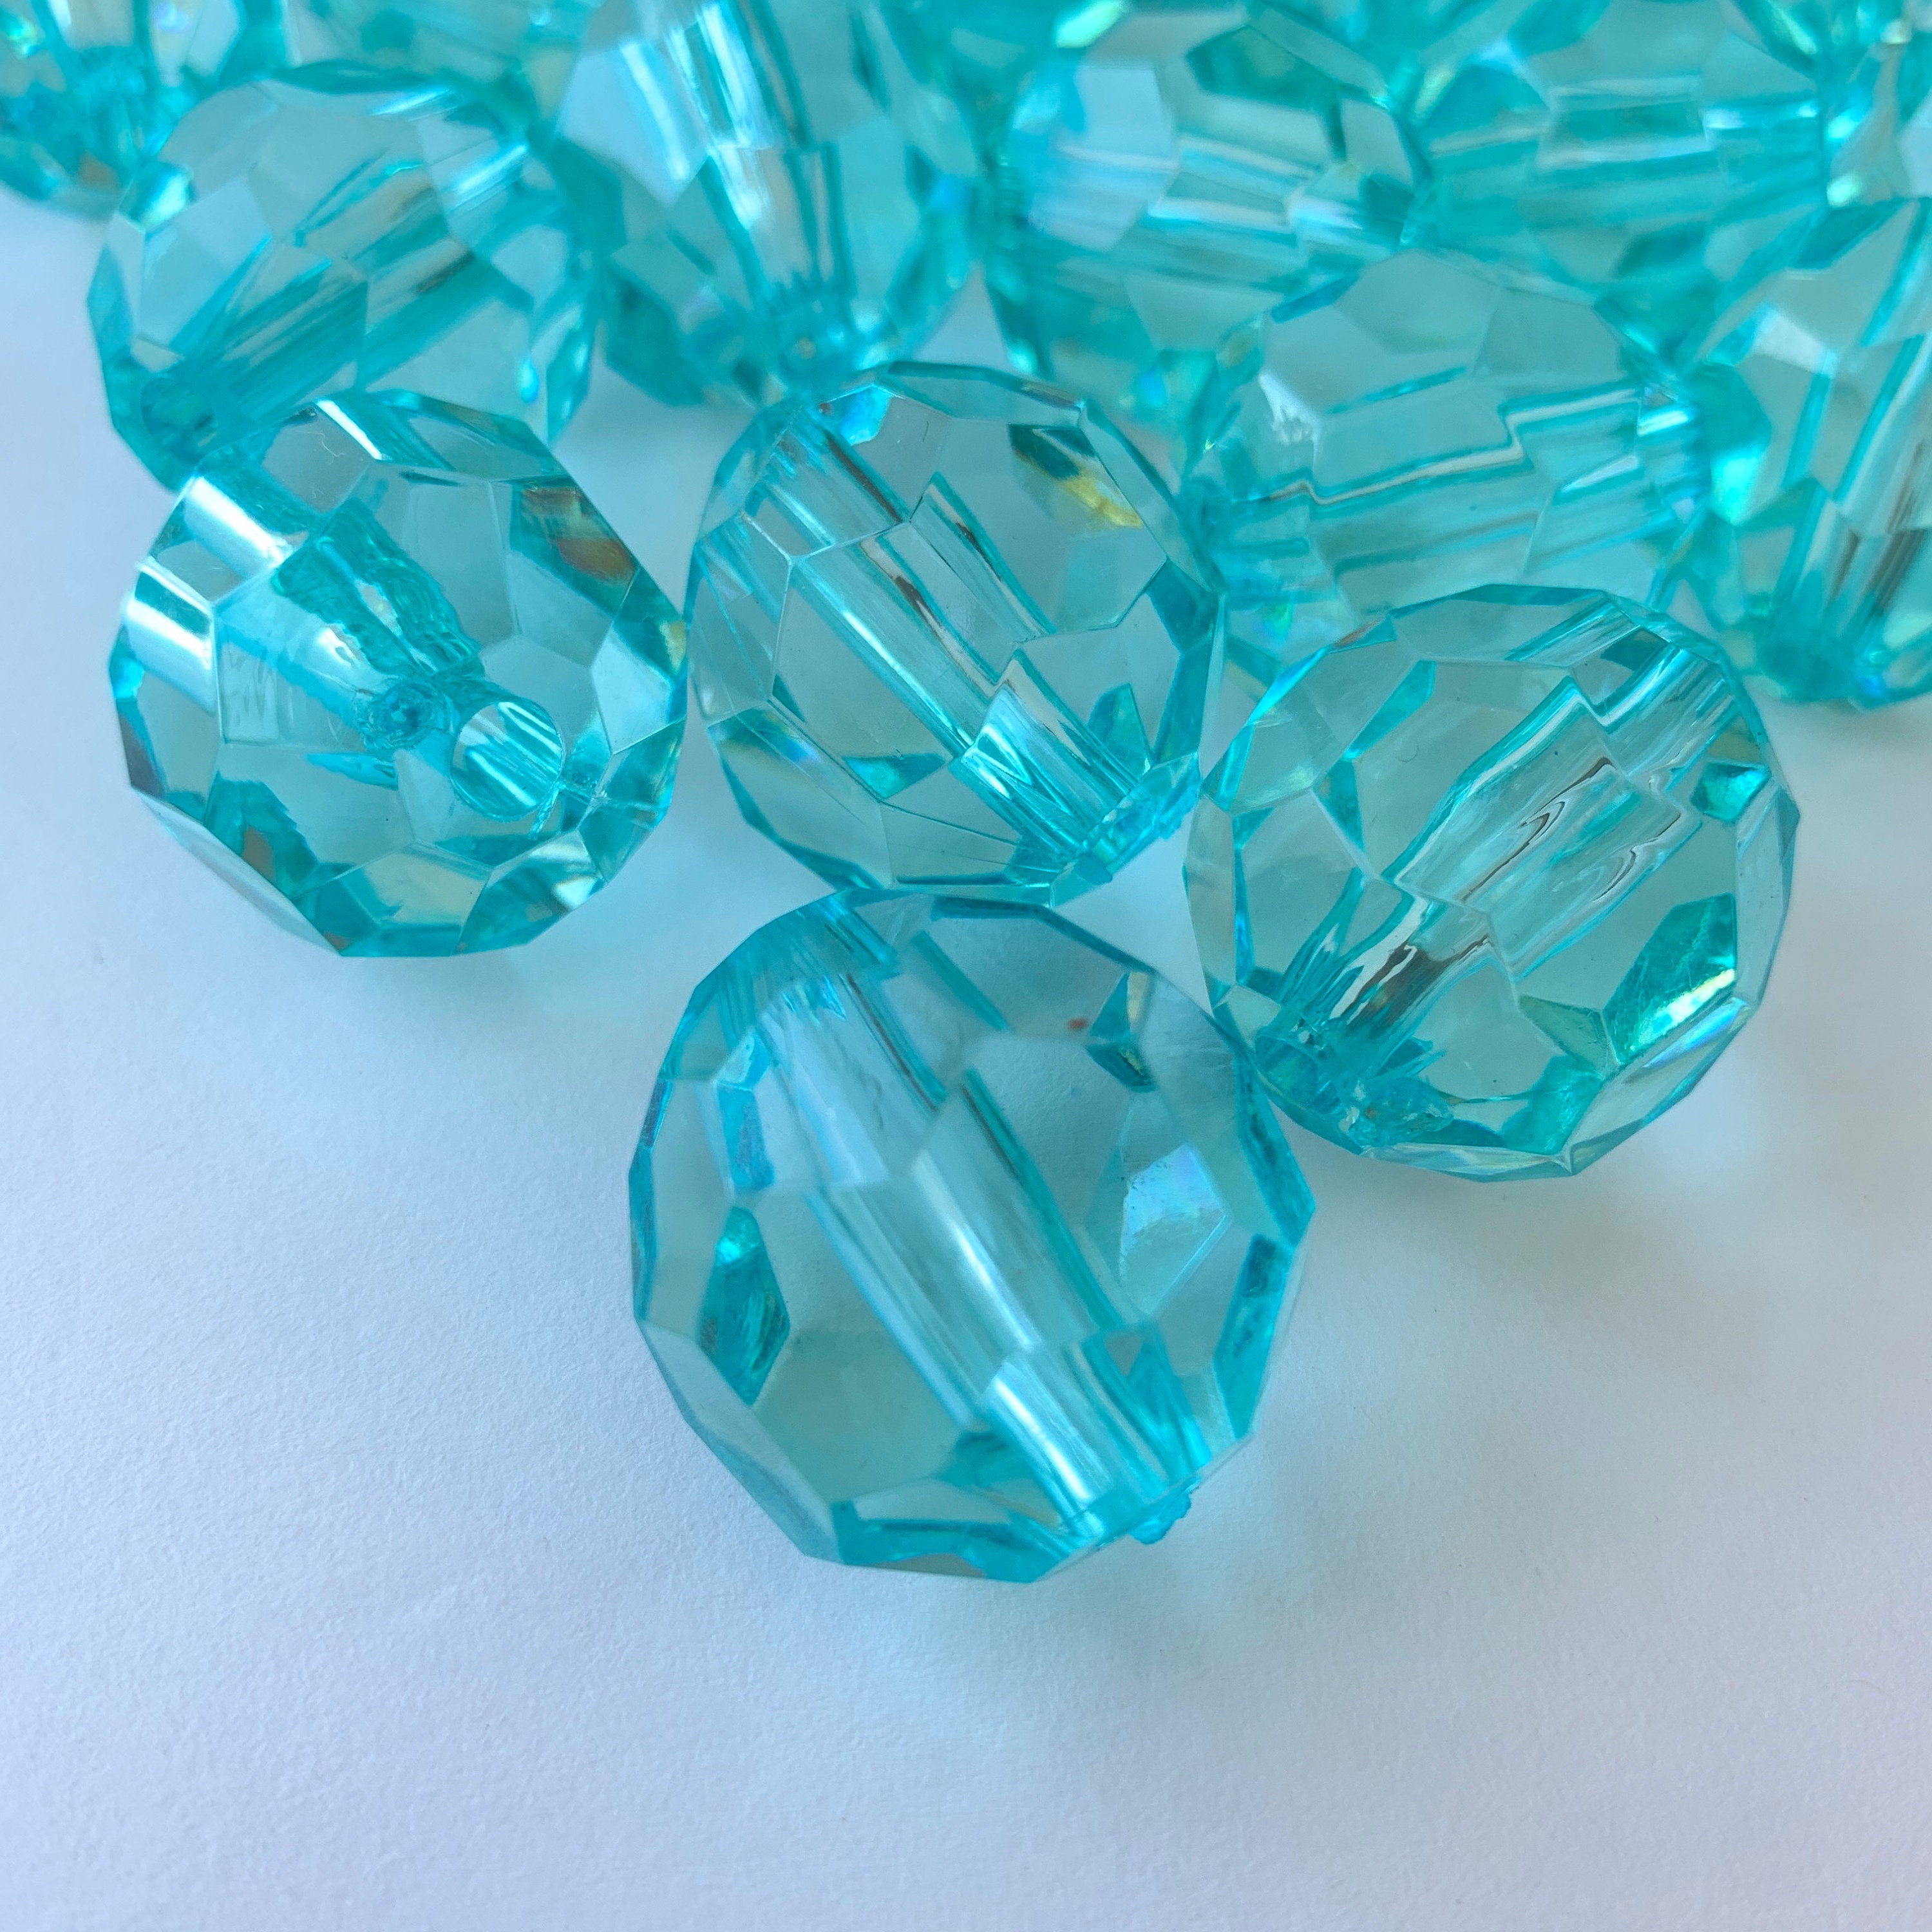 Lenora Dame Raw Materials Aqua Lucite Faceted Large Beads for 